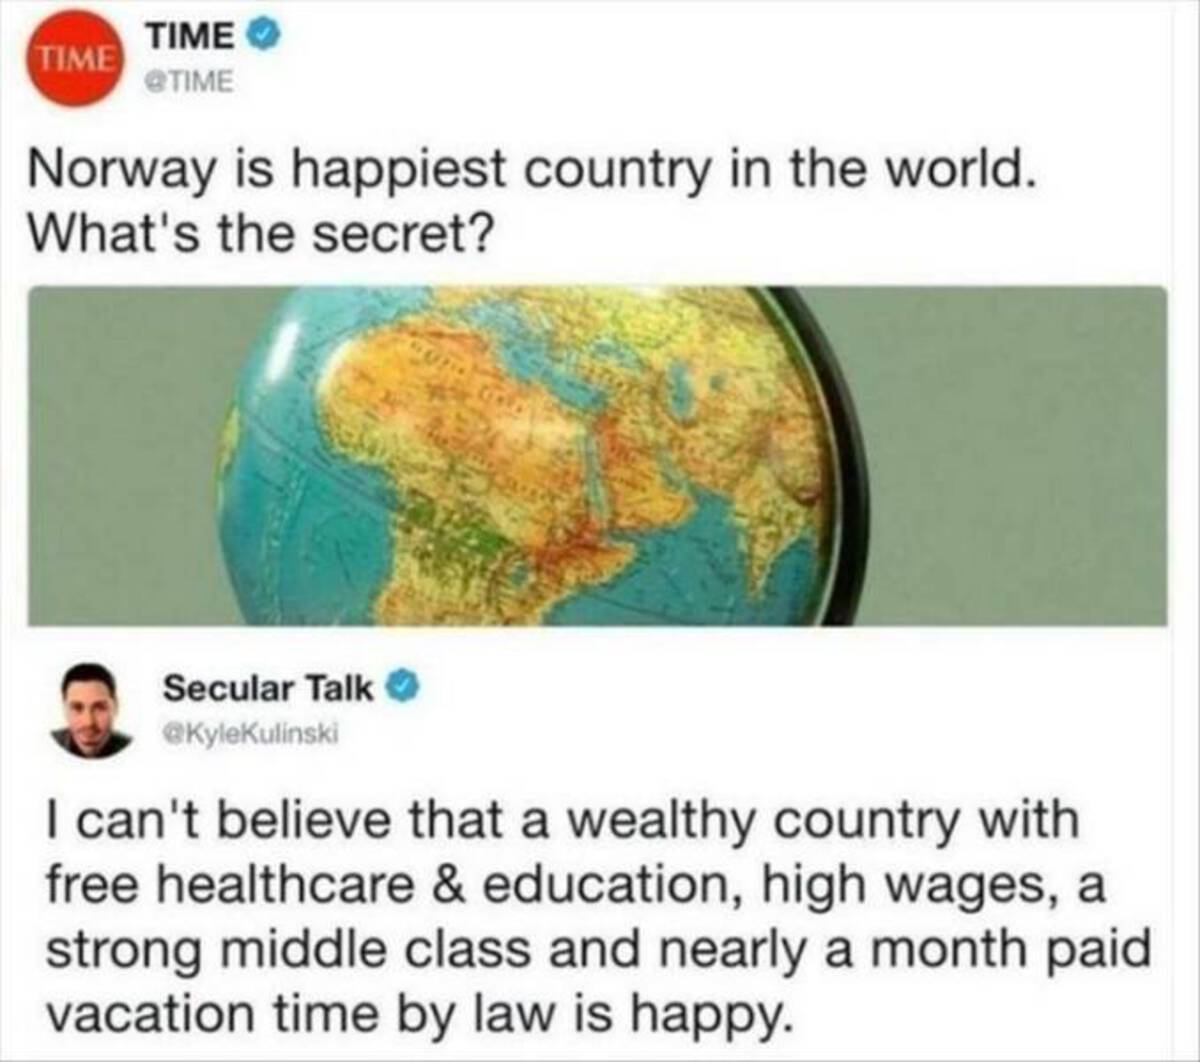 r facepalm names - Time Time Norway is happiest country in the world. What's the secret? Secular Talk > I can't believe that a wealthy country with free healthcare & education, high wages, a strong middle class and nearly a month paid vacation time by law